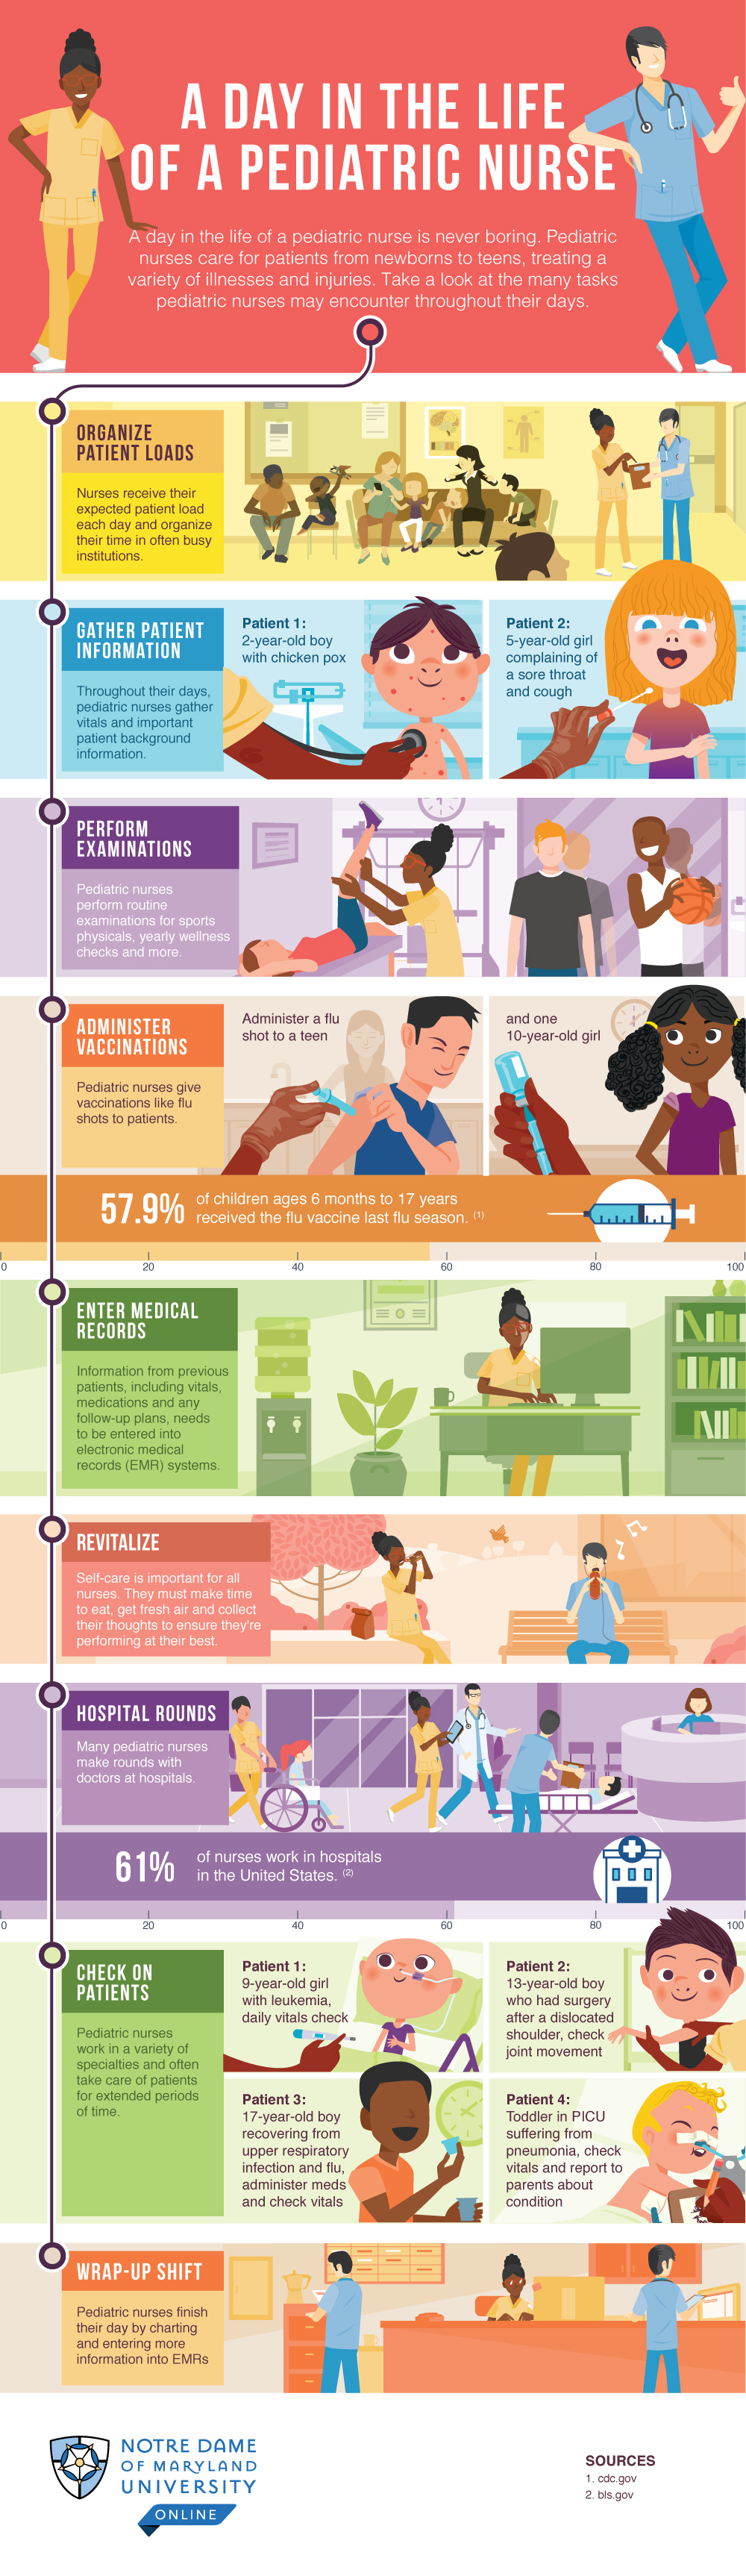 Illustrated infographic showing the examples of responsibilities that fill the day of a pediatric nurse.